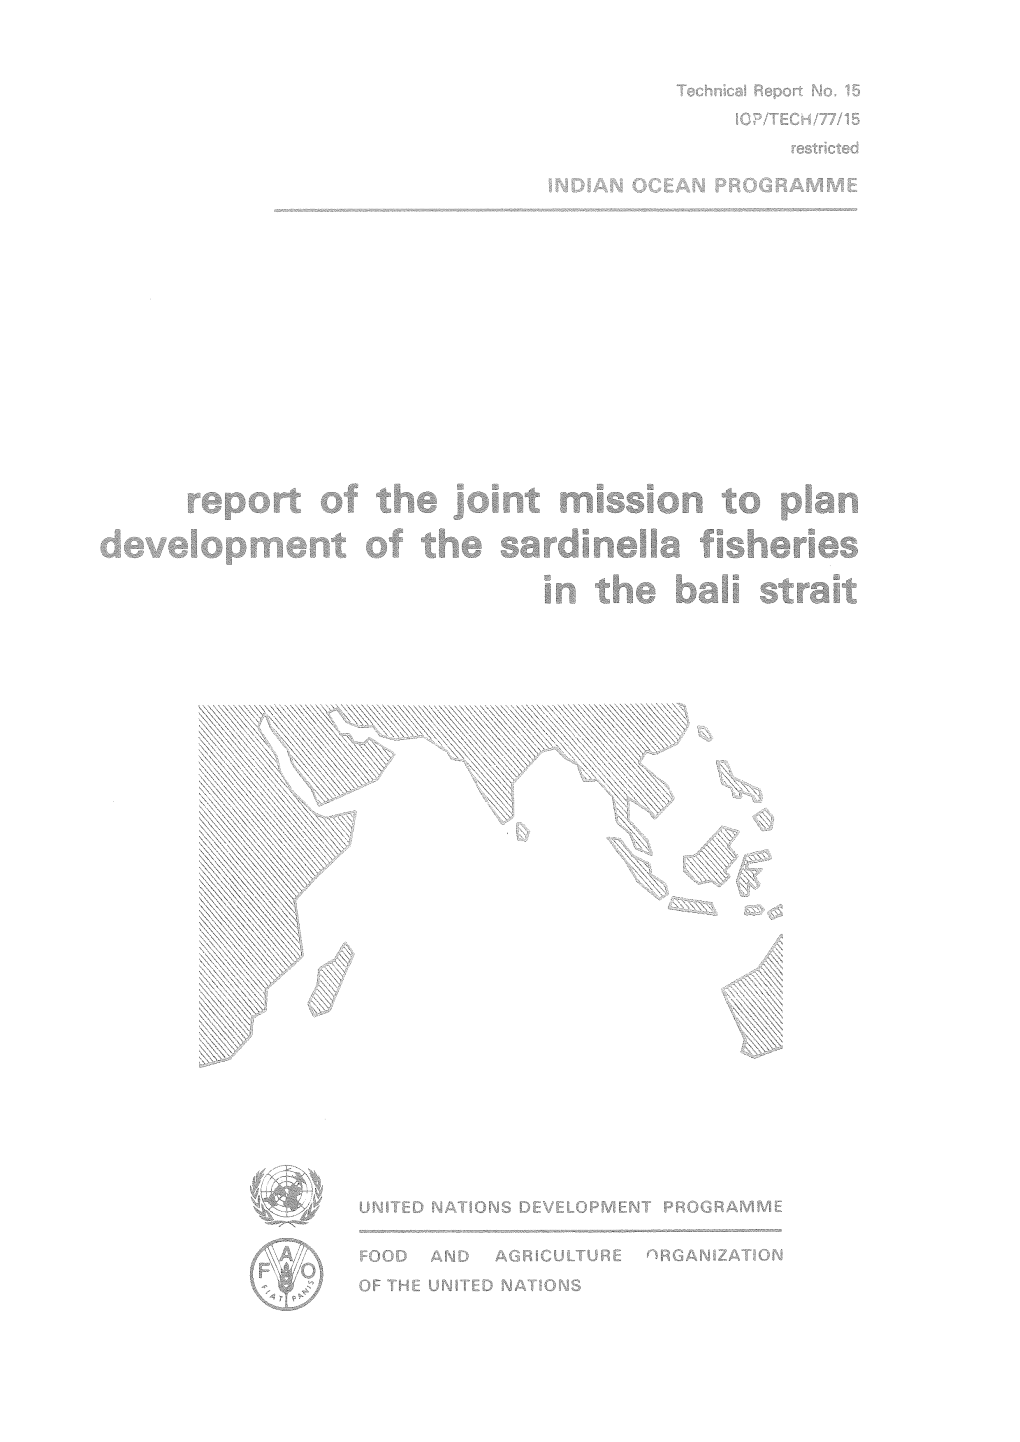 Report of the Joint Mission to Plan Development of the Sardinella F'isheries in the Bali Strait